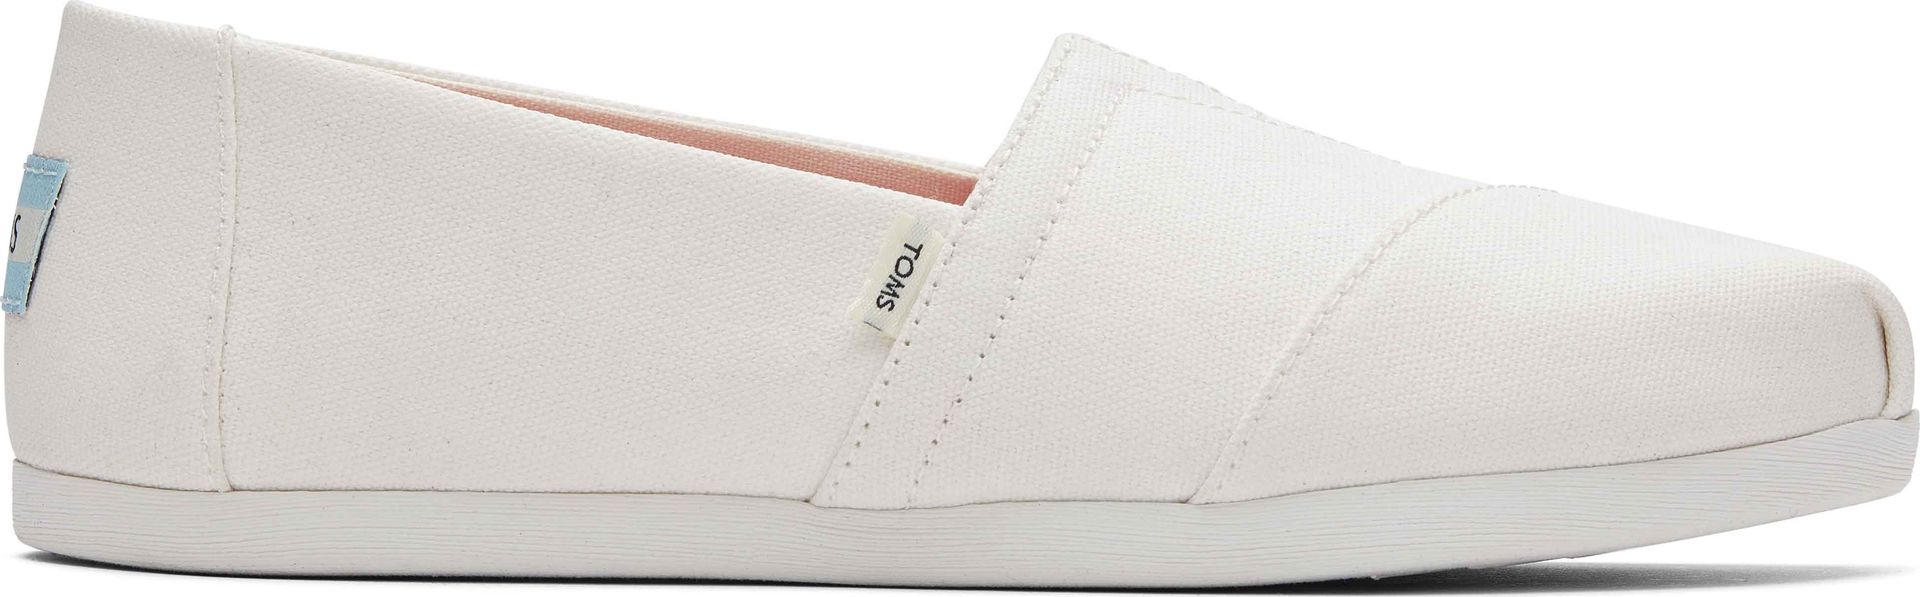 TOMS Color Changing Twill Women's Alpargata Dusty Pink 40